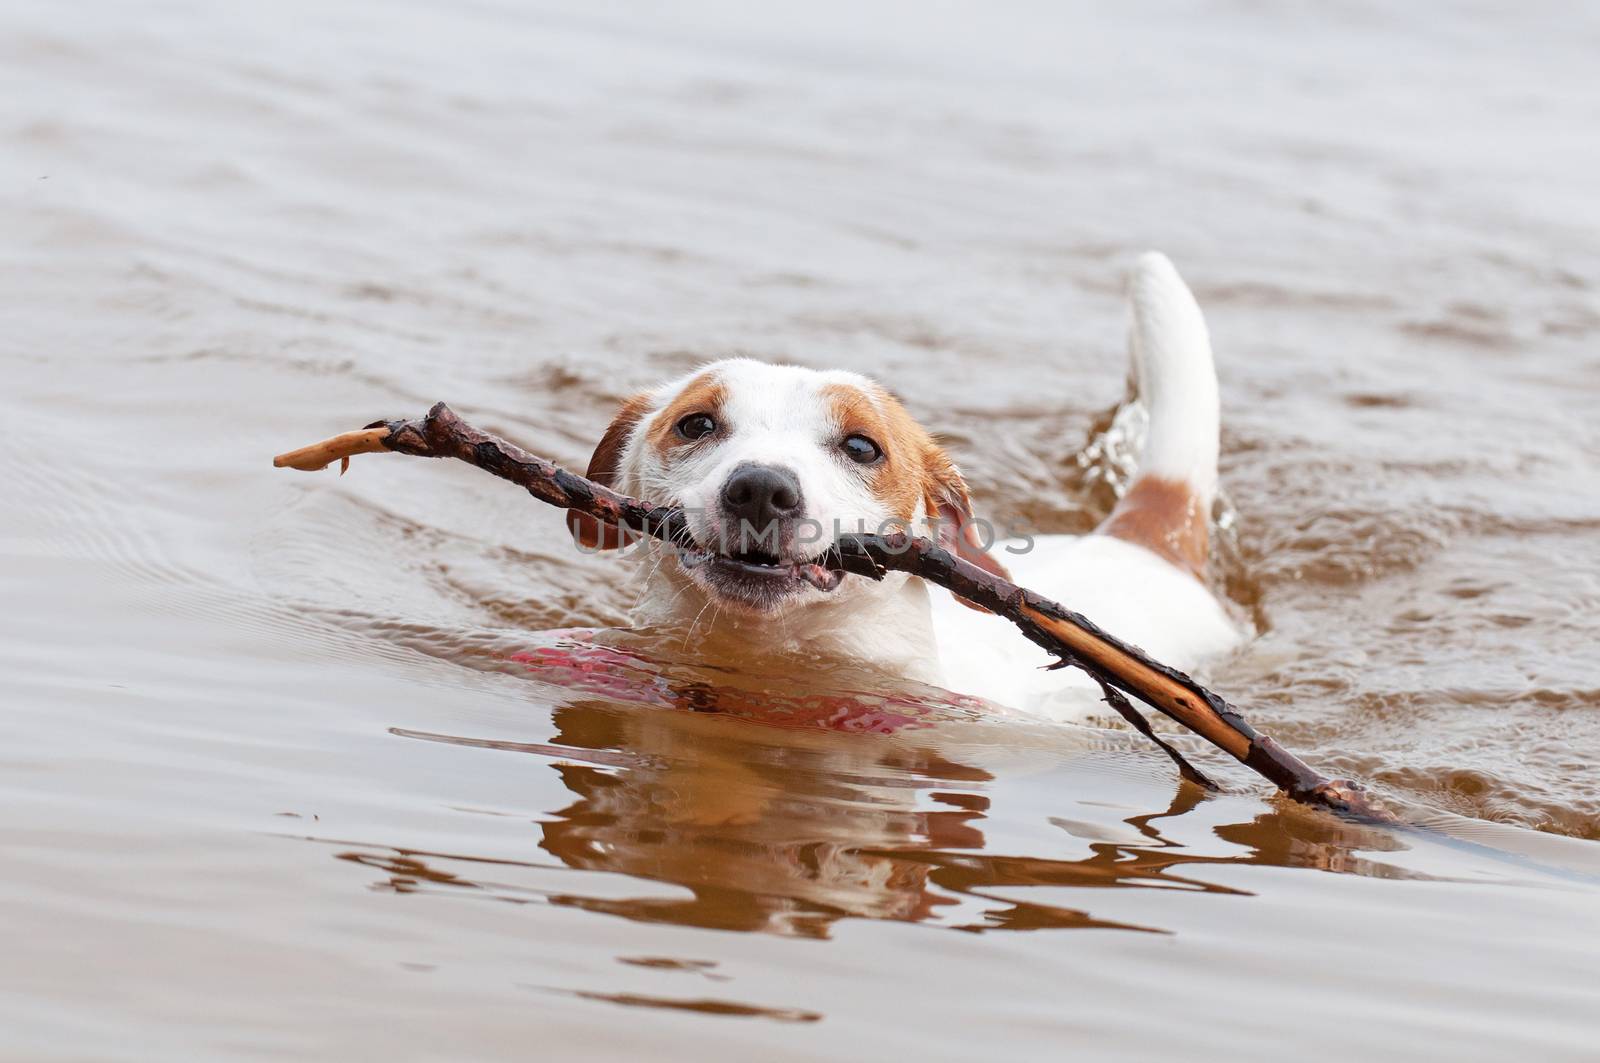 Jack Russell Terrier dog is swimming with a big stick in the mouth. Dog Jack Russell plays with big stick on the sandy beach against the blue river water.